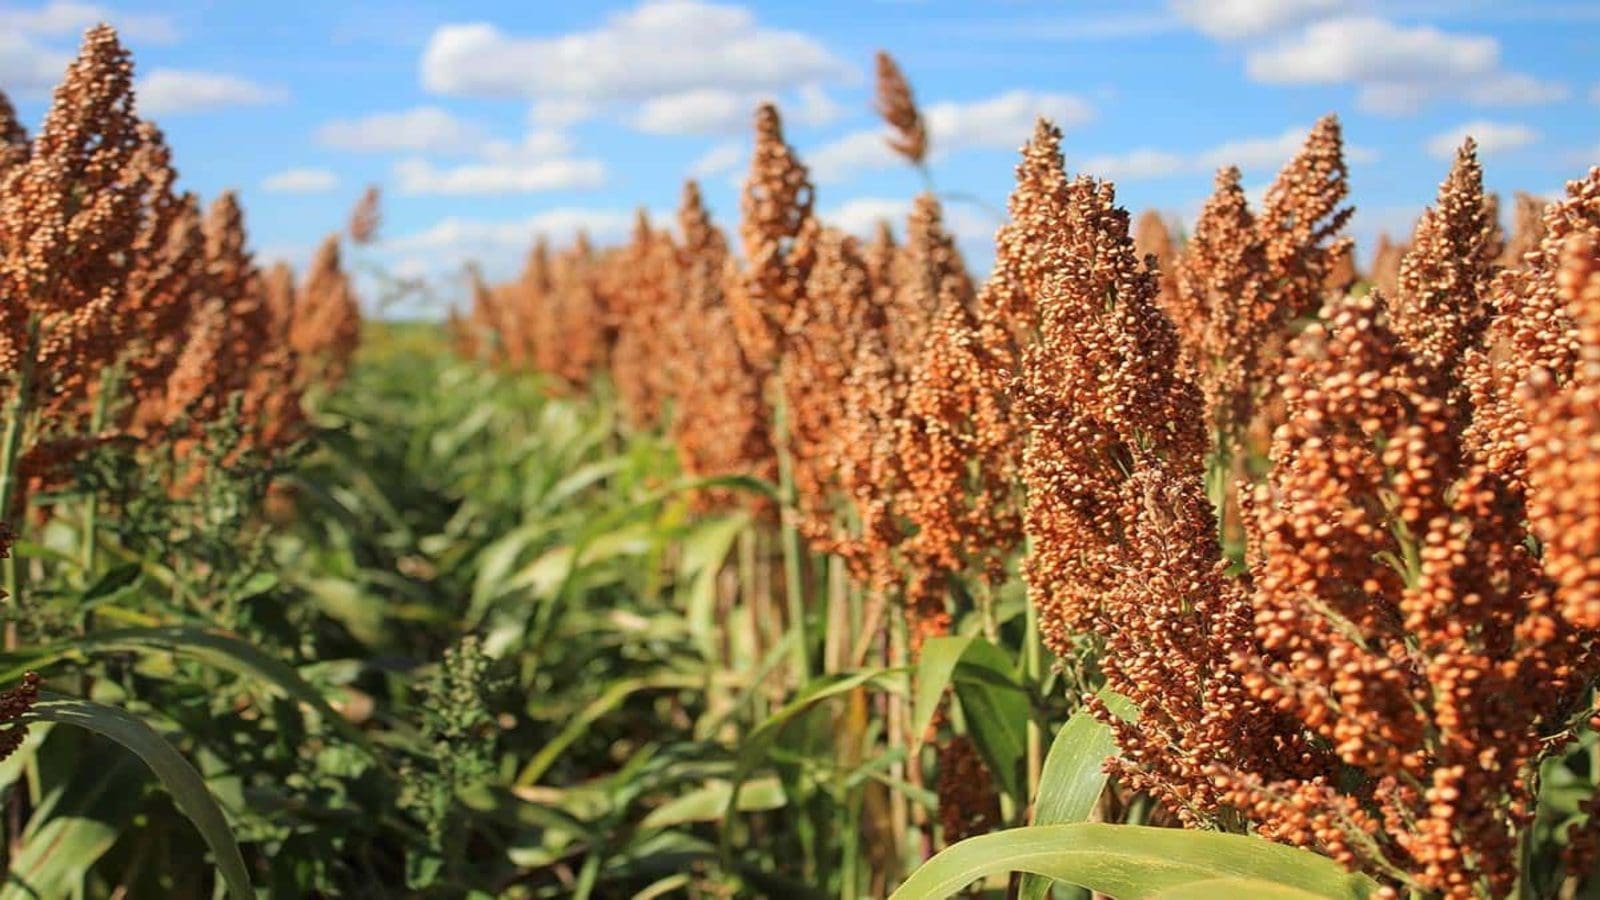 Nigeria sorghum production expected to increase to 7 million tonnes